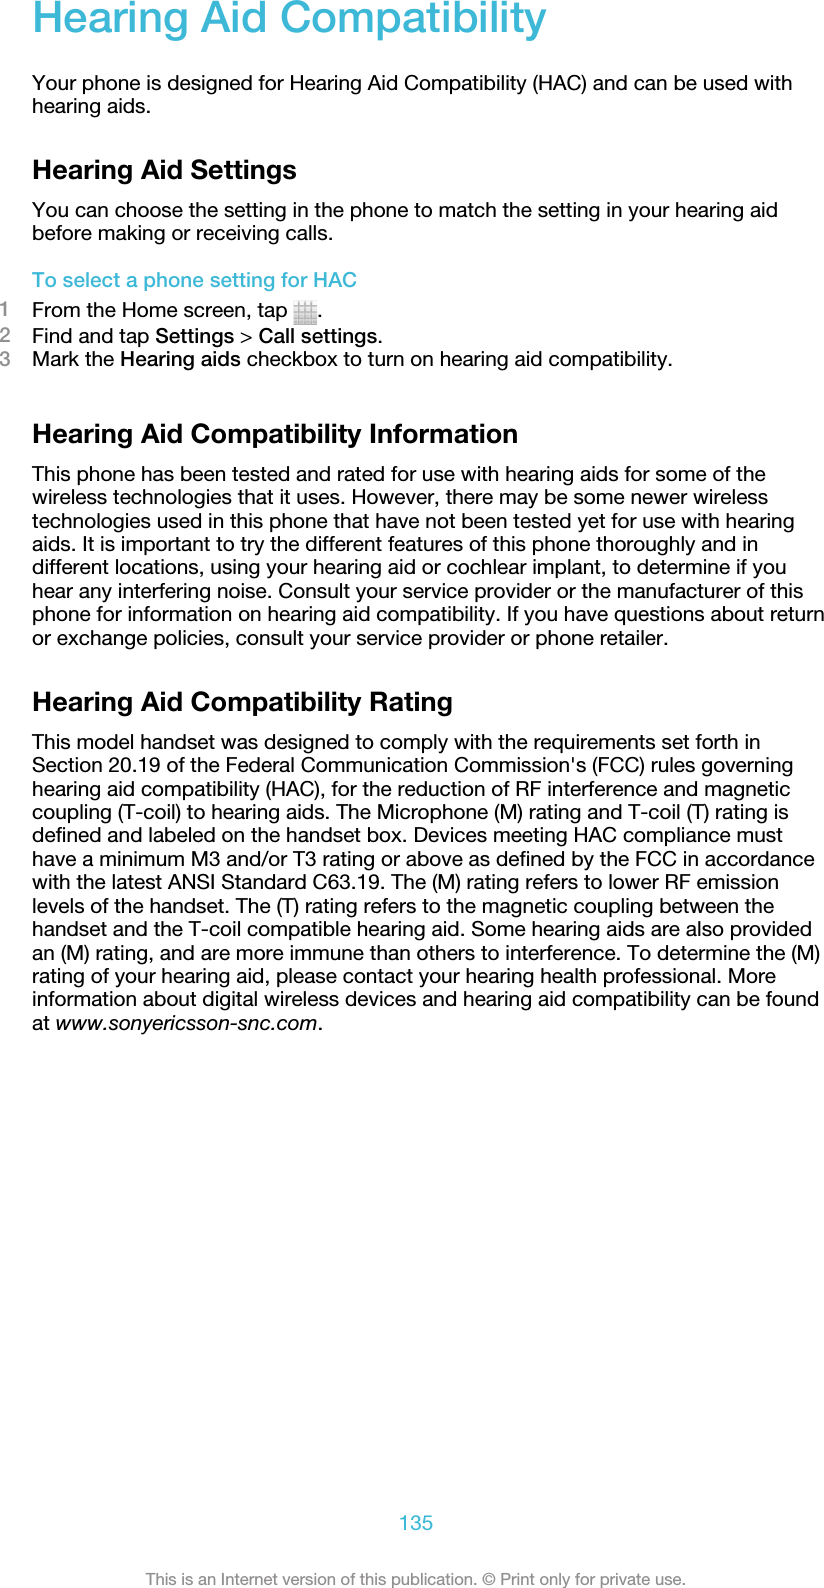 Hearing Aid CompatibilityYour phone is designed for Hearing Aid Compatibility (HAC) and can be used withhearing aids.Hearing Aid SettingsYou can choose the setting in the phone to match the setting in your hearing aidbefore making or receiving calls.To select a phone setting for HAC1From the Home screen, tap  .2Find and tap Settings &gt; Call settings.3Mark the Hearing aids checkbox to turn on hearing aid compatibility.Hearing Aid Compatibility InformationThis phone has been tested and rated for use with hearing aids for some of thewireless technologies that it uses. However, there may be some newer wirelesstechnologies used in this phone that have not been tested yet for use with hearingaids. It is important to try the different features of this phone thoroughly and indifferent locations, using your hearing aid or cochlear implant, to determine if youhear any interfering noise. Consult your service provider or the manufacturer of thisphone for information on hearing aid compatibility. If you have questions about returnor exchange policies, consult your service provider or phone retailer.Hearing Aid Compatibility RatingThis model handset was designed to comply with the requirements set forth inSection 20.19 of the Federal Communication Commission&apos;s (FCC) rules governinghearing aid compatibility (HAC), for the reduction of RF interference and magneticcoupling (T-coil) to hearing aids. The Microphone (M) rating and T-coil (T) rating isdefined and labeled on the handset box. Devices meeting HAC compliance musthave a minimum M3 and/or T3 rating or above as defined by the FCC in accordancewith the latest ANSI Standard C63.19. The (M) rating refers to lower RF emissionlevels of the handset. The (T) rating refers to the magnetic coupling between thehandset and the T-coil compatible hearing aid. Some hearing aids are also providedan (M) rating, and are more immune than others to interference. To determine the (M)rating of your hearing aid, please contact your hearing health professional. Moreinformation about digital wireless devices and hearing aid compatibility can be foundat www.sonyericsson-snc.com.135This is an Internet version of this publication. © Print only for private use.